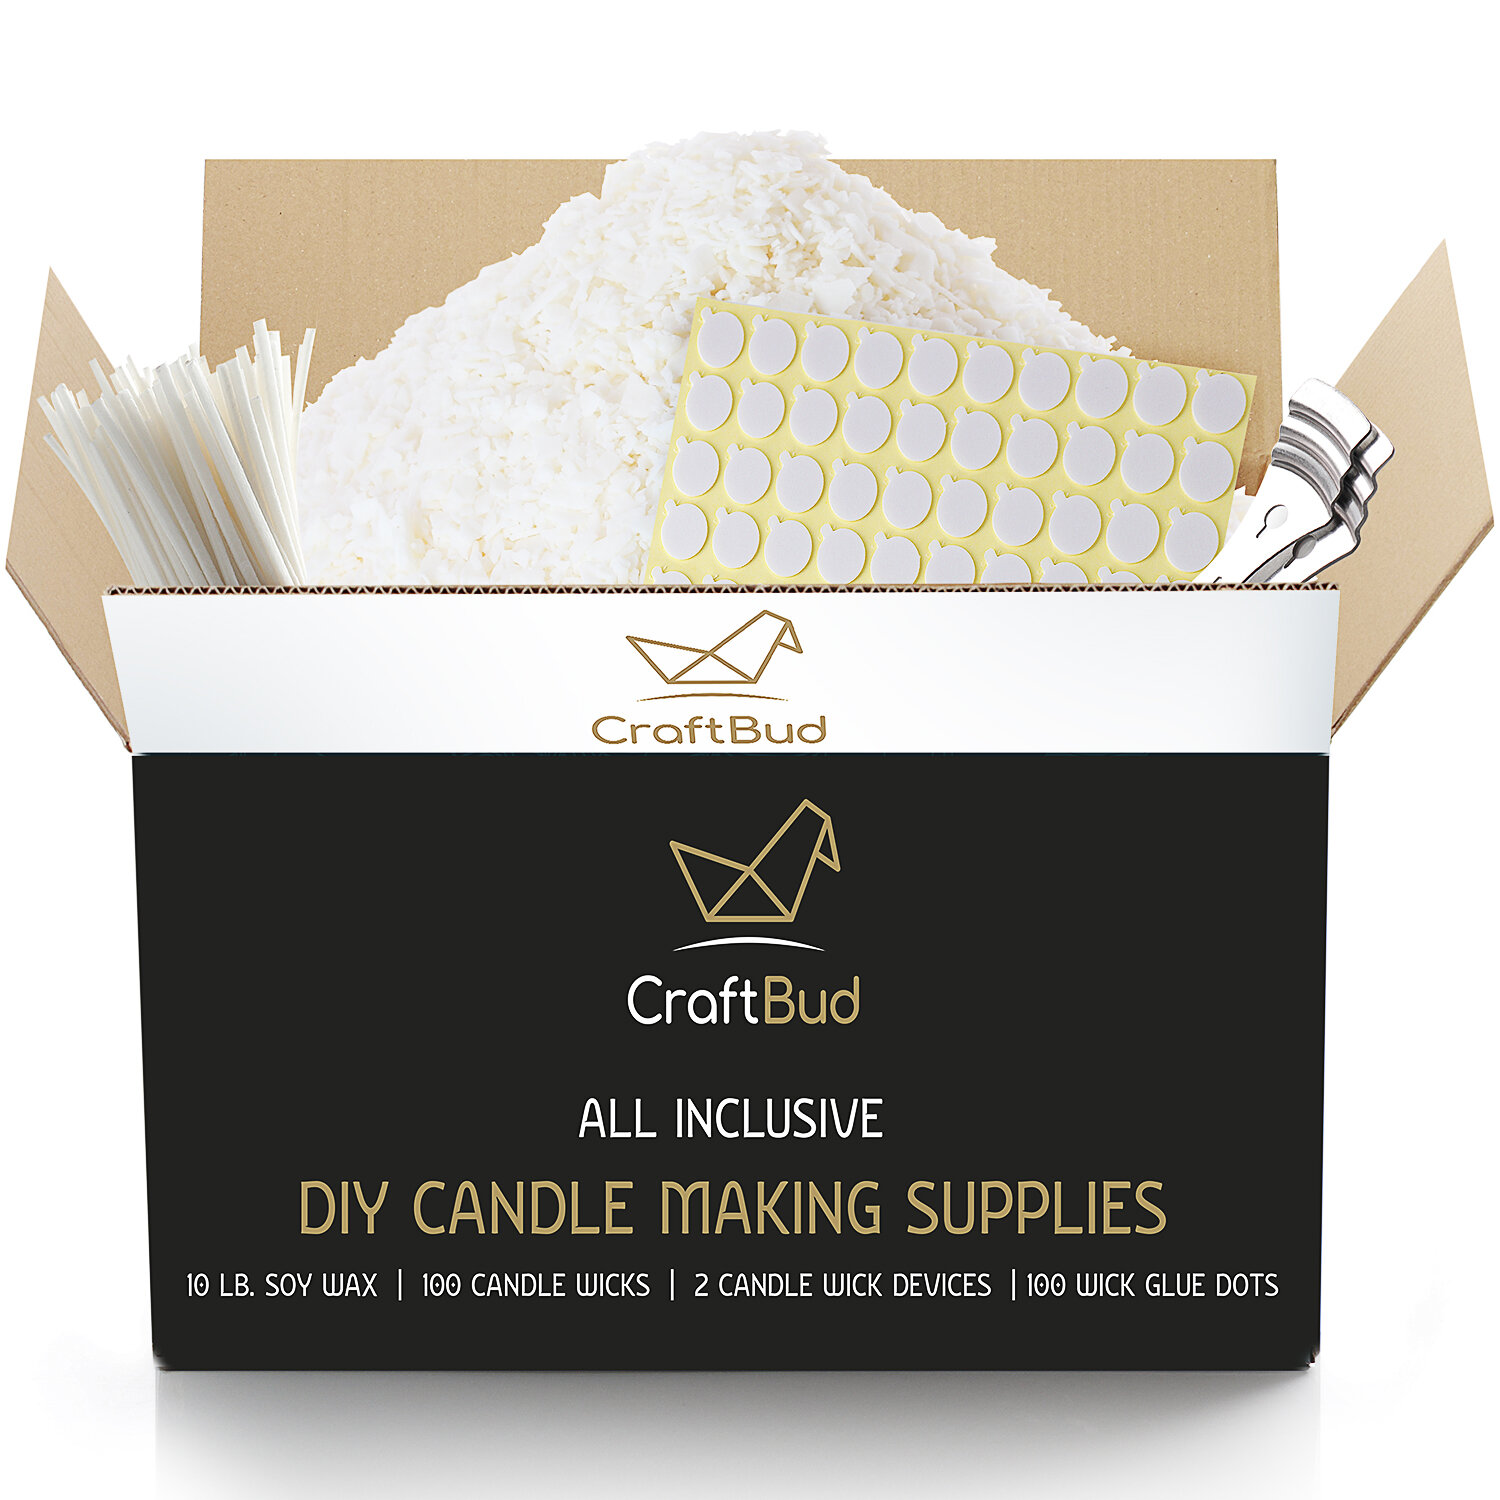 Craftbud DIY Candle Making Supplies - Kit for Adults and Beginners - White